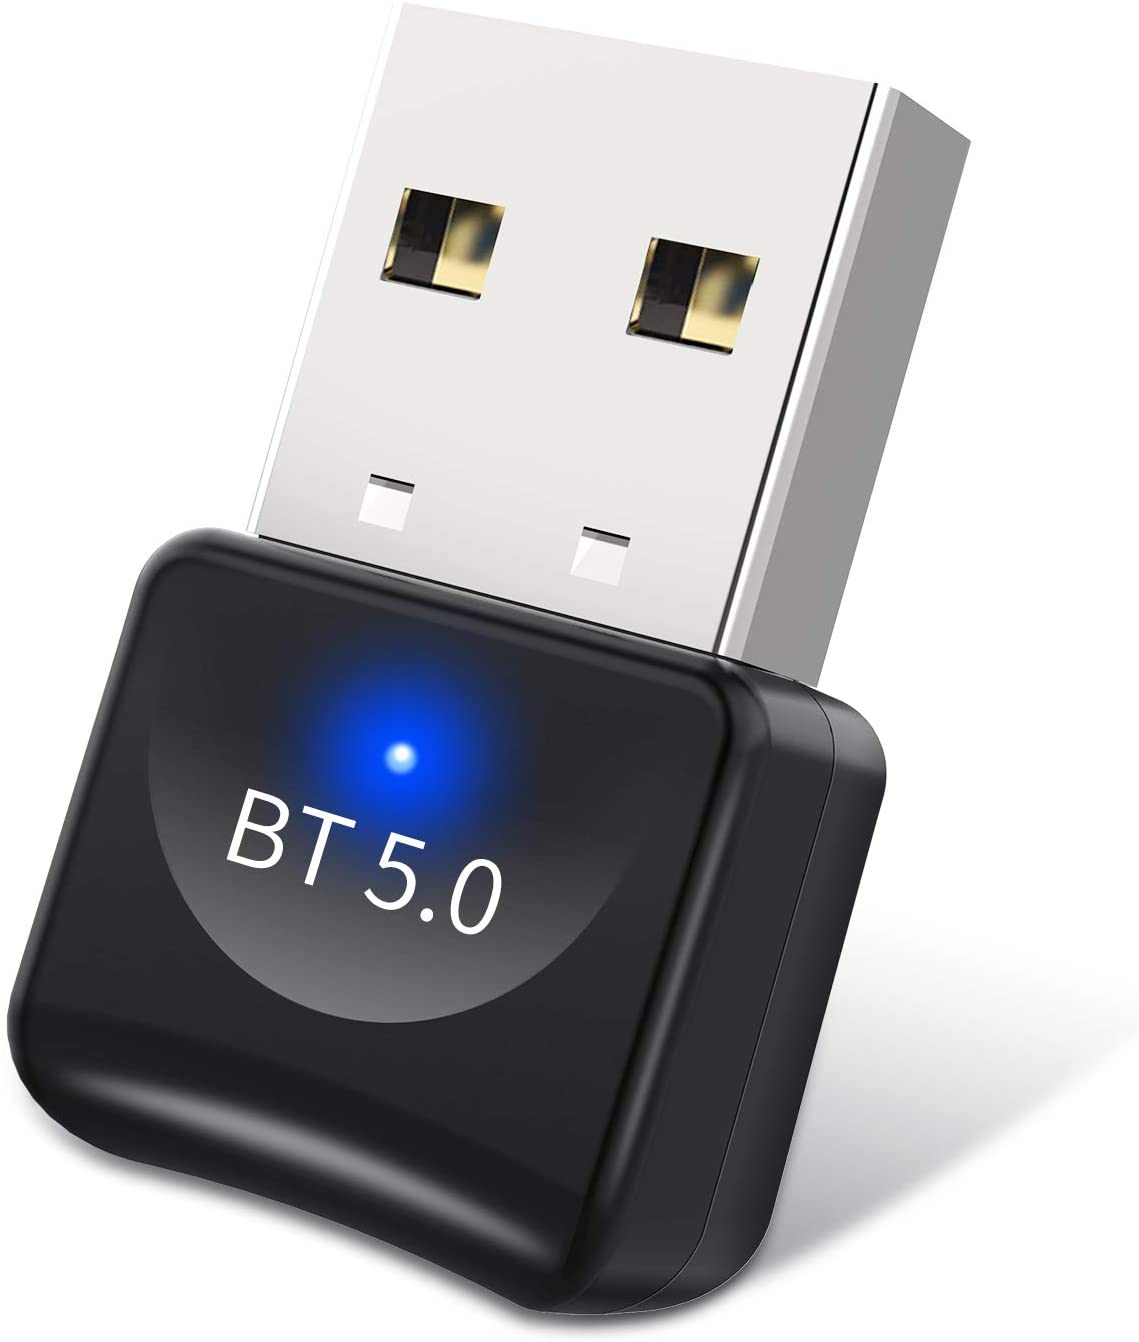 USB Bluetooth 5.0 Adapter for PC, Bluetooth Dongle Supports Windows 10/8.1/8/7 Desktop Laptop (LNC)